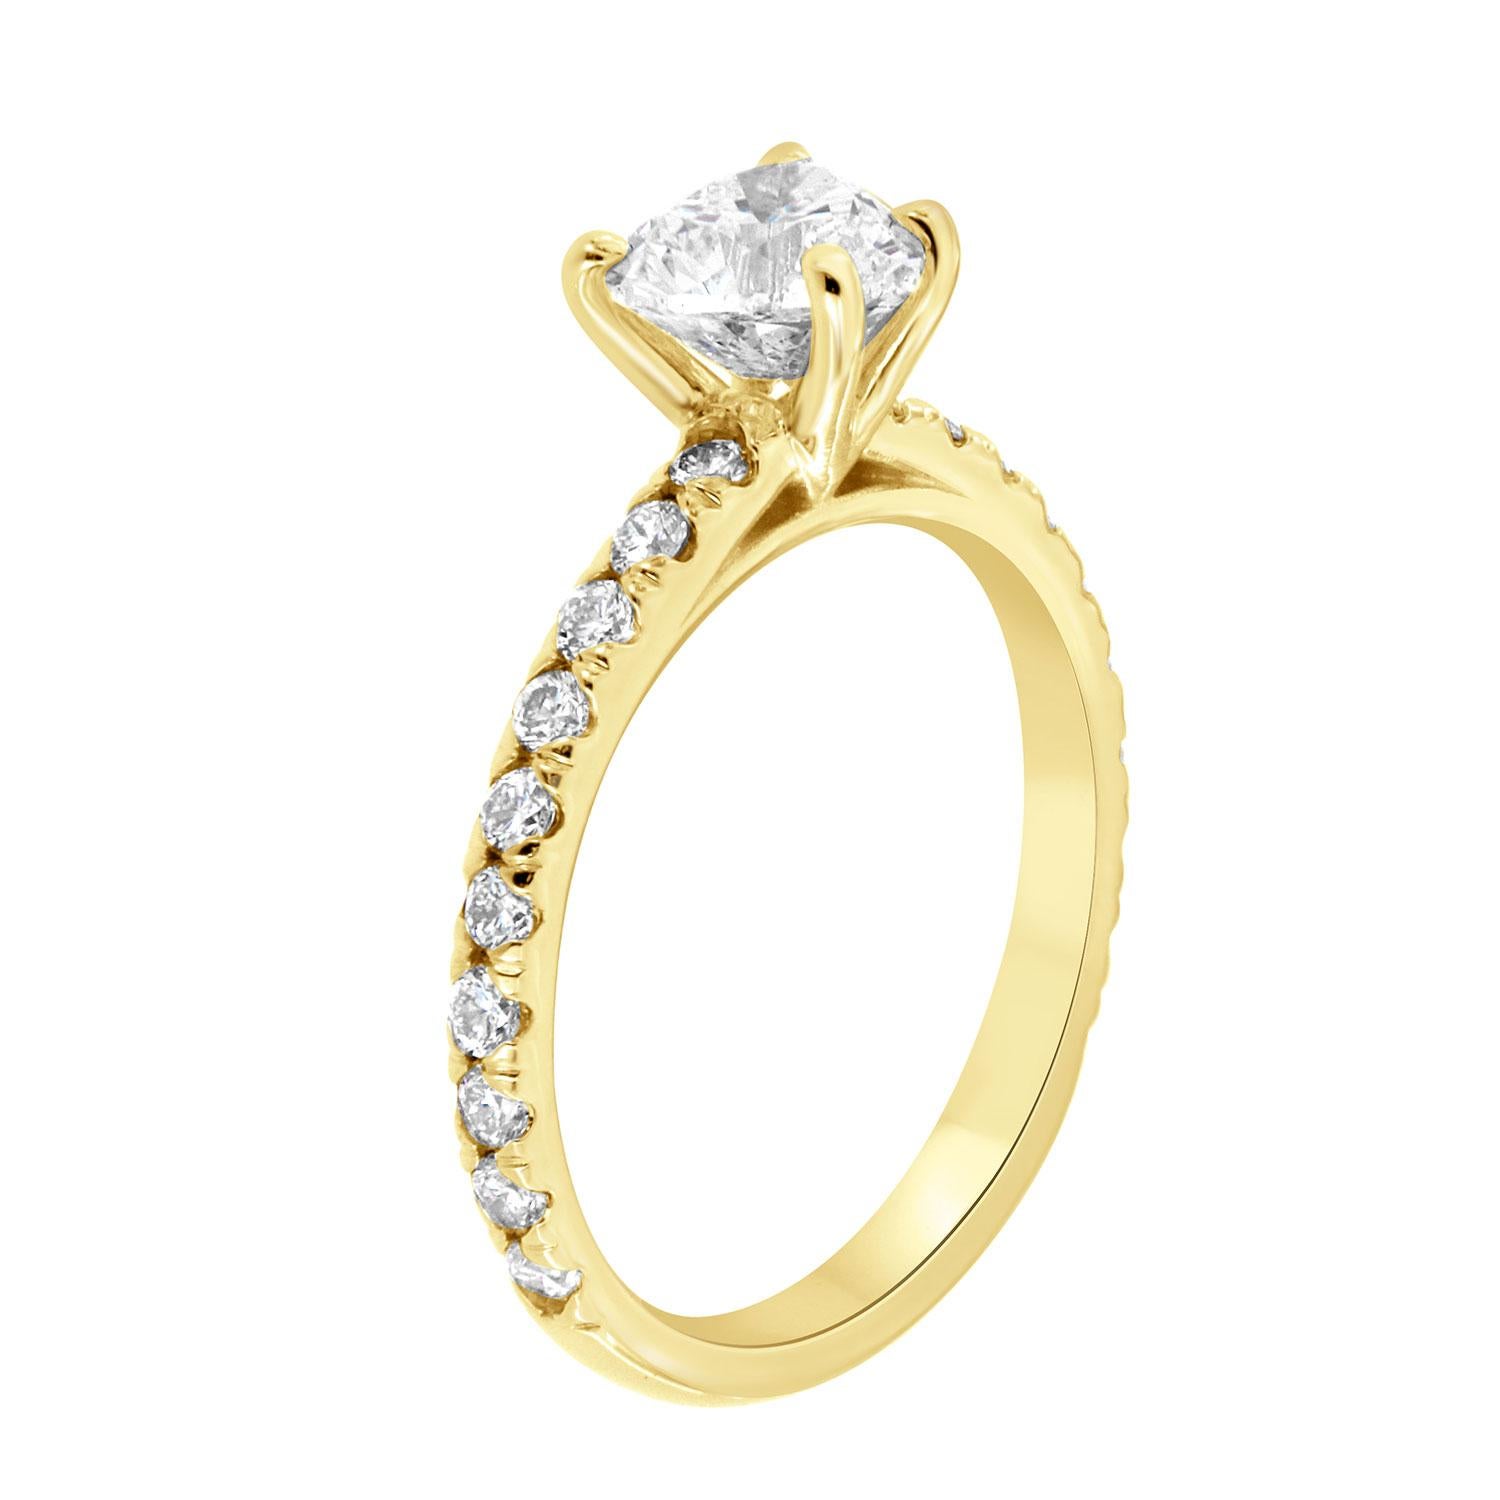 This delicate 14K Yellow gold ring features twenty (20) Brilliant round diamonds Micro-Prong set on top of a 2 MM wide band. In the center of the ring is set one Natural Diamond GIA Certificate 7366371289. 

Shape: Heart 
Weight: 0.91
Color: